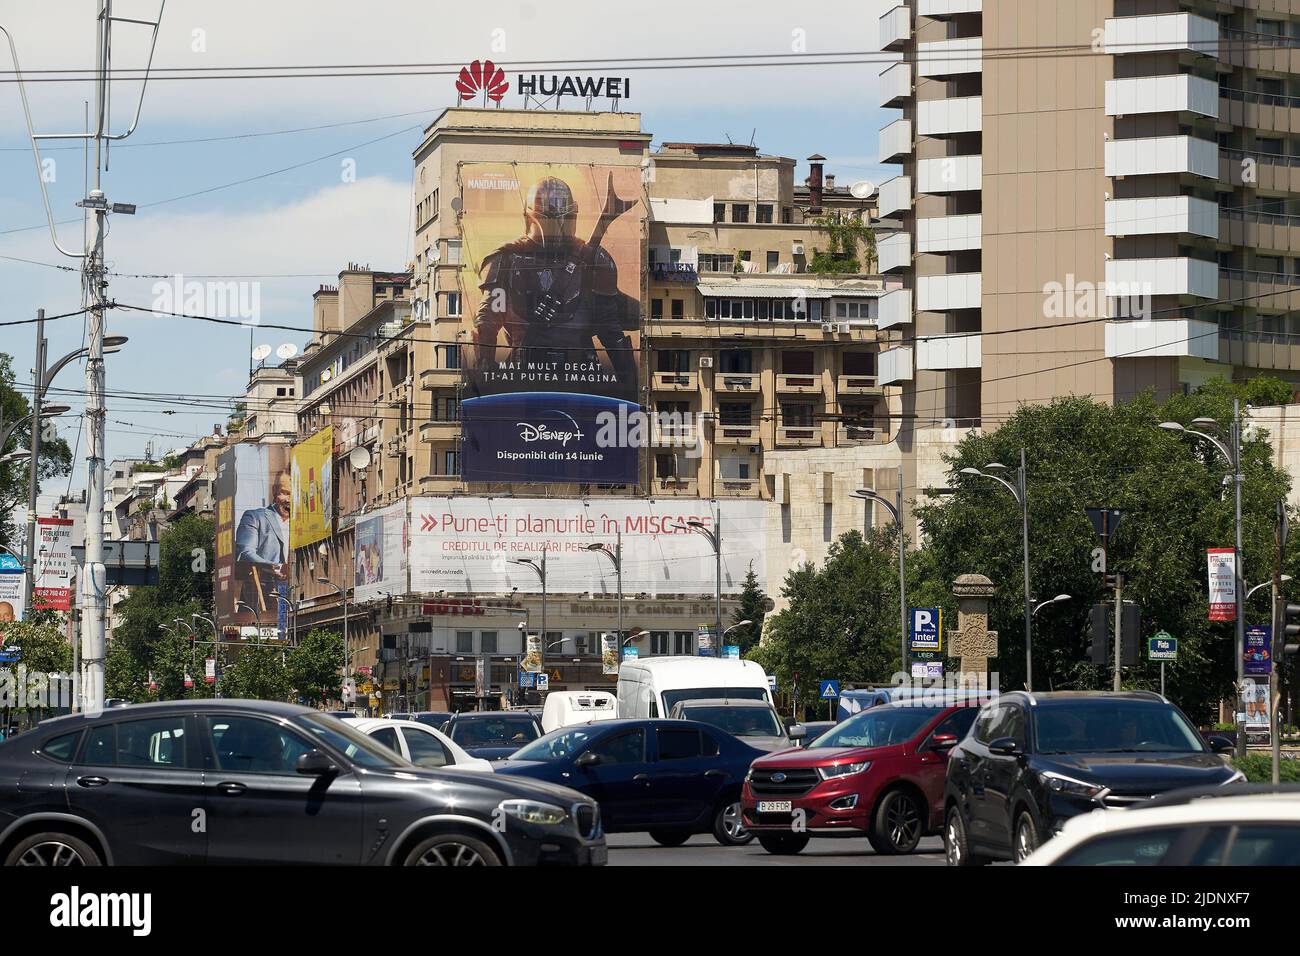 Bucharest, Romania - June 22, 2022: Extra large banner advertising The Mandalorian Star Wars TV Series on Disney+ is displayed on a building, in downt Stock Photo